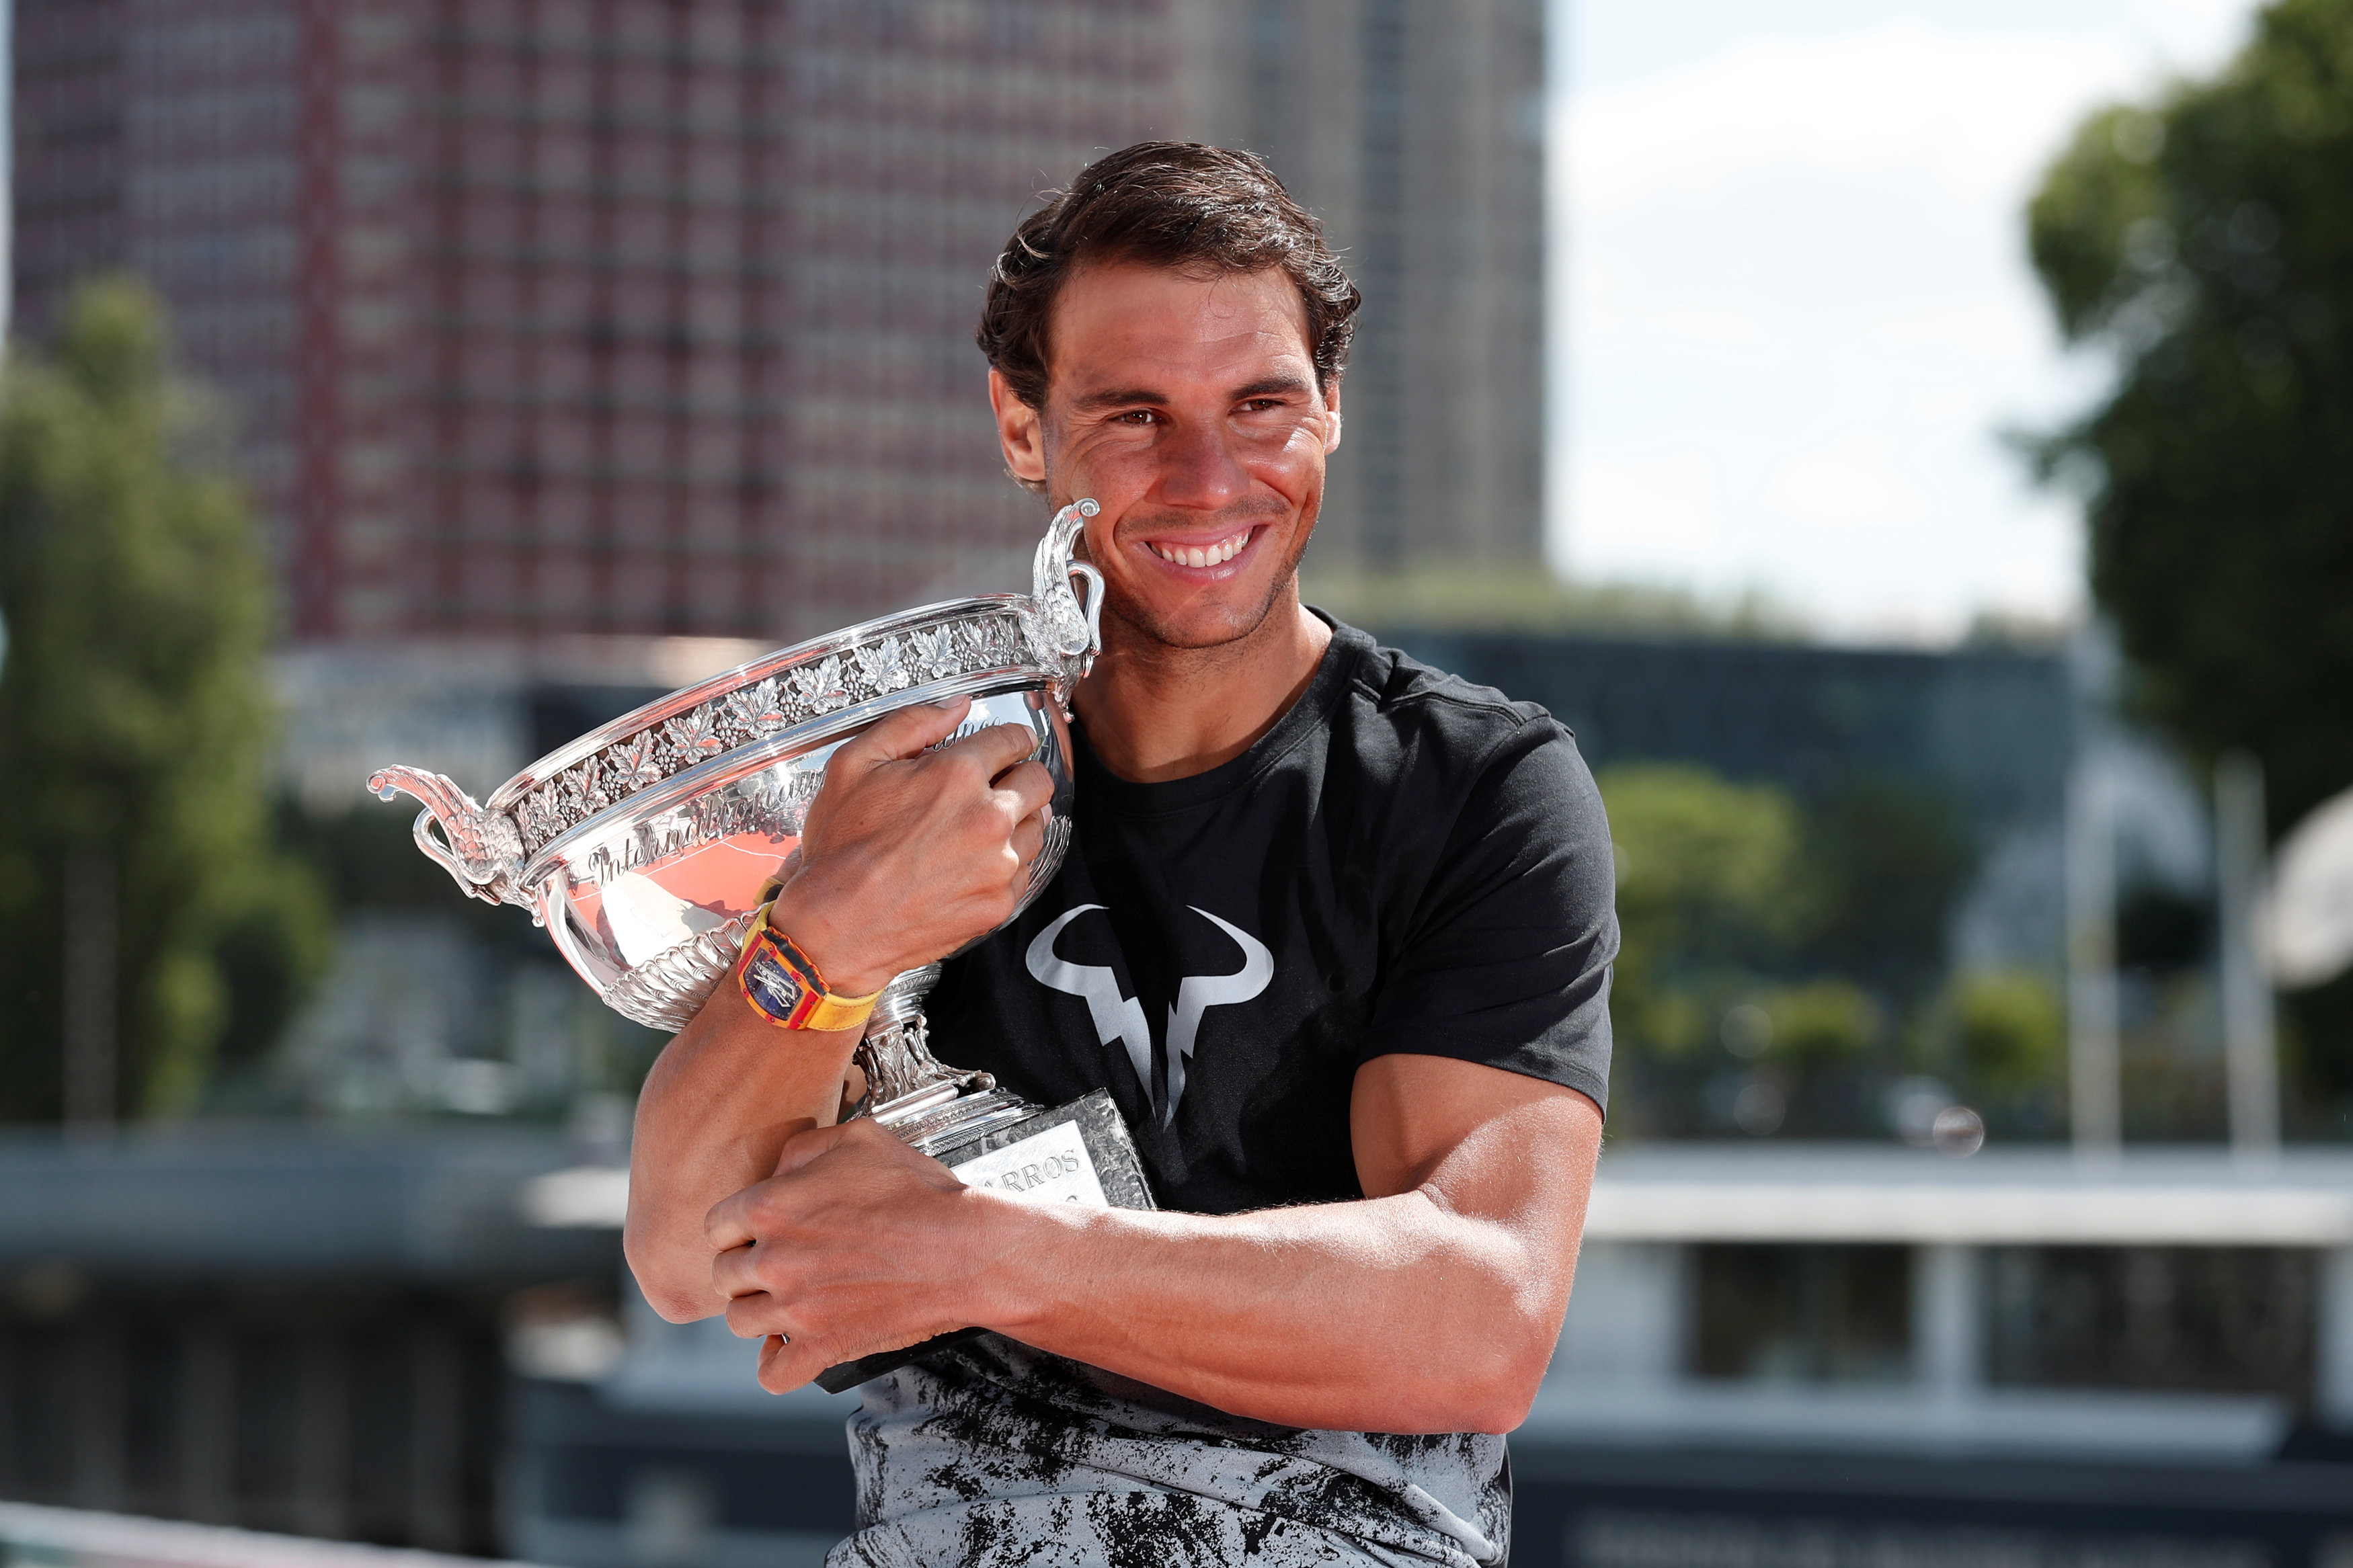 Tennis: Rafael Nadal first to qualify for ATP World Tour Finals